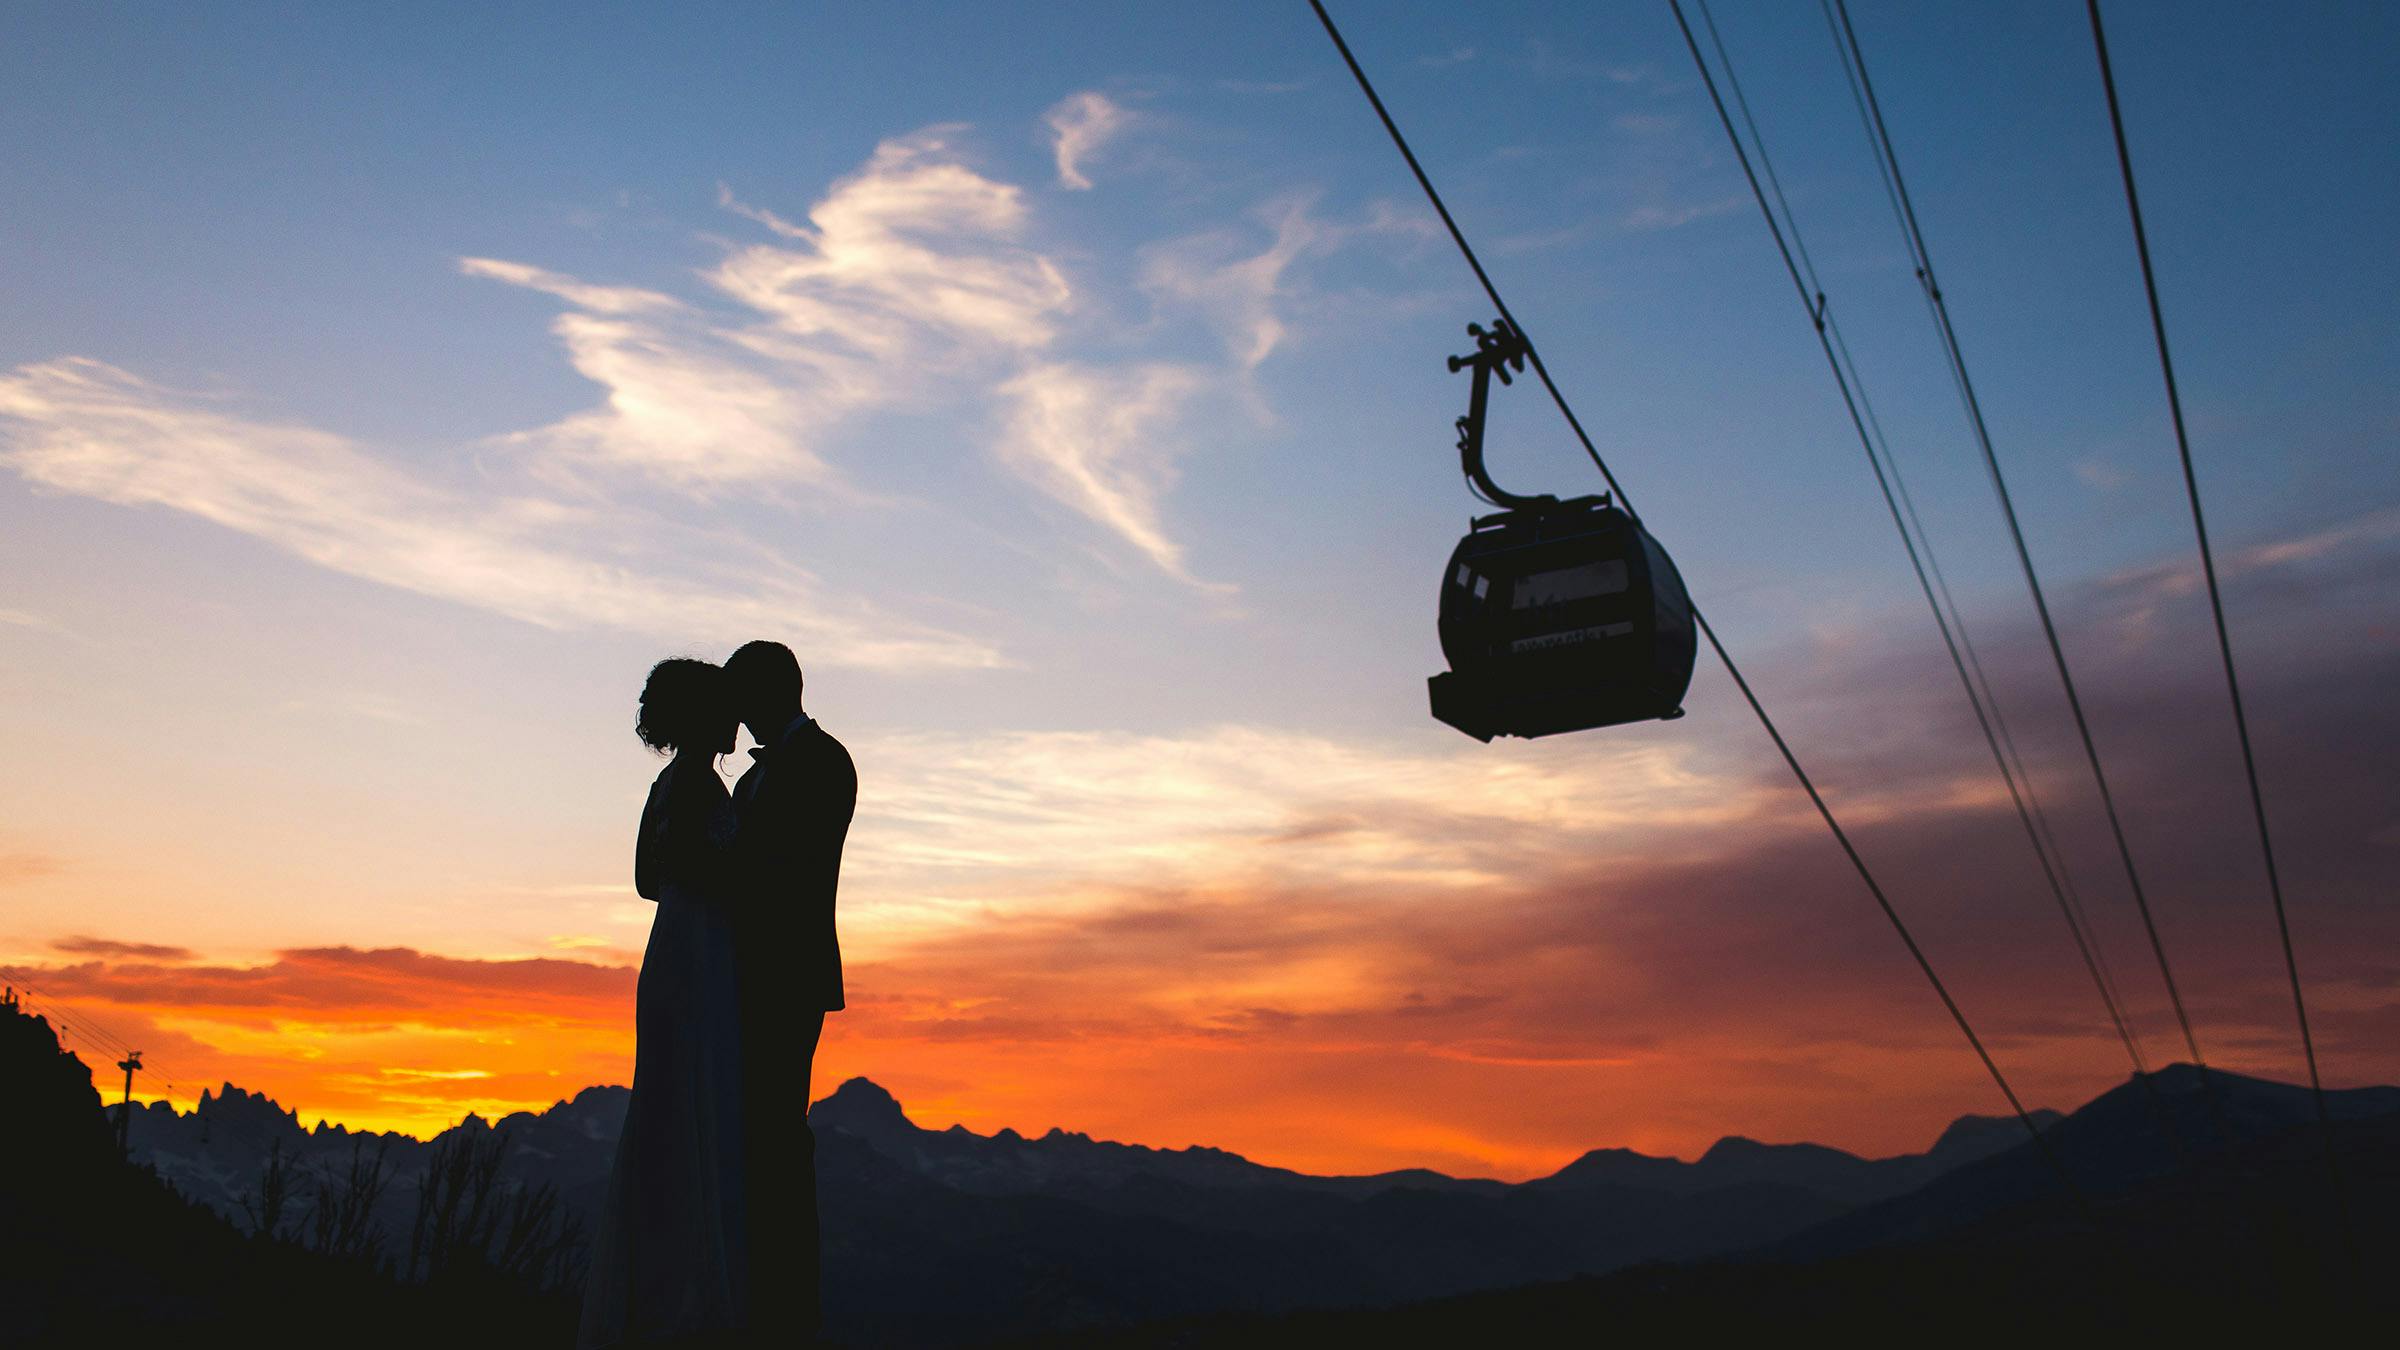 Silhouette of couple posing at sunset with gondola silhouette in the background